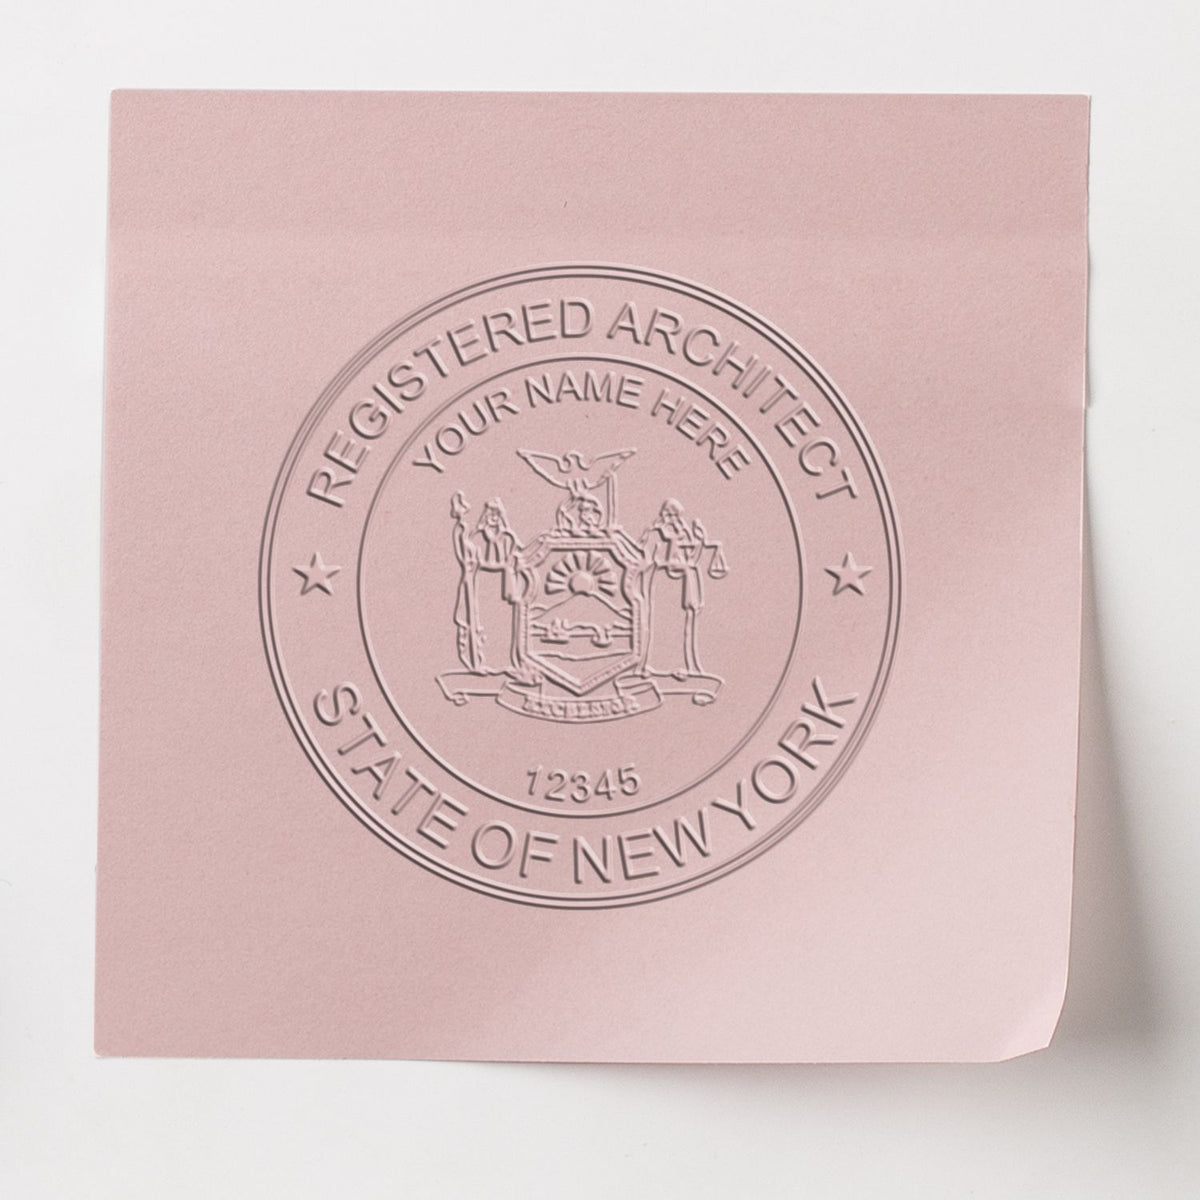 State of New York Architectural Seal Embosser in use photo showing a stamped imprint of the State of New York Architectural Seal Embosser